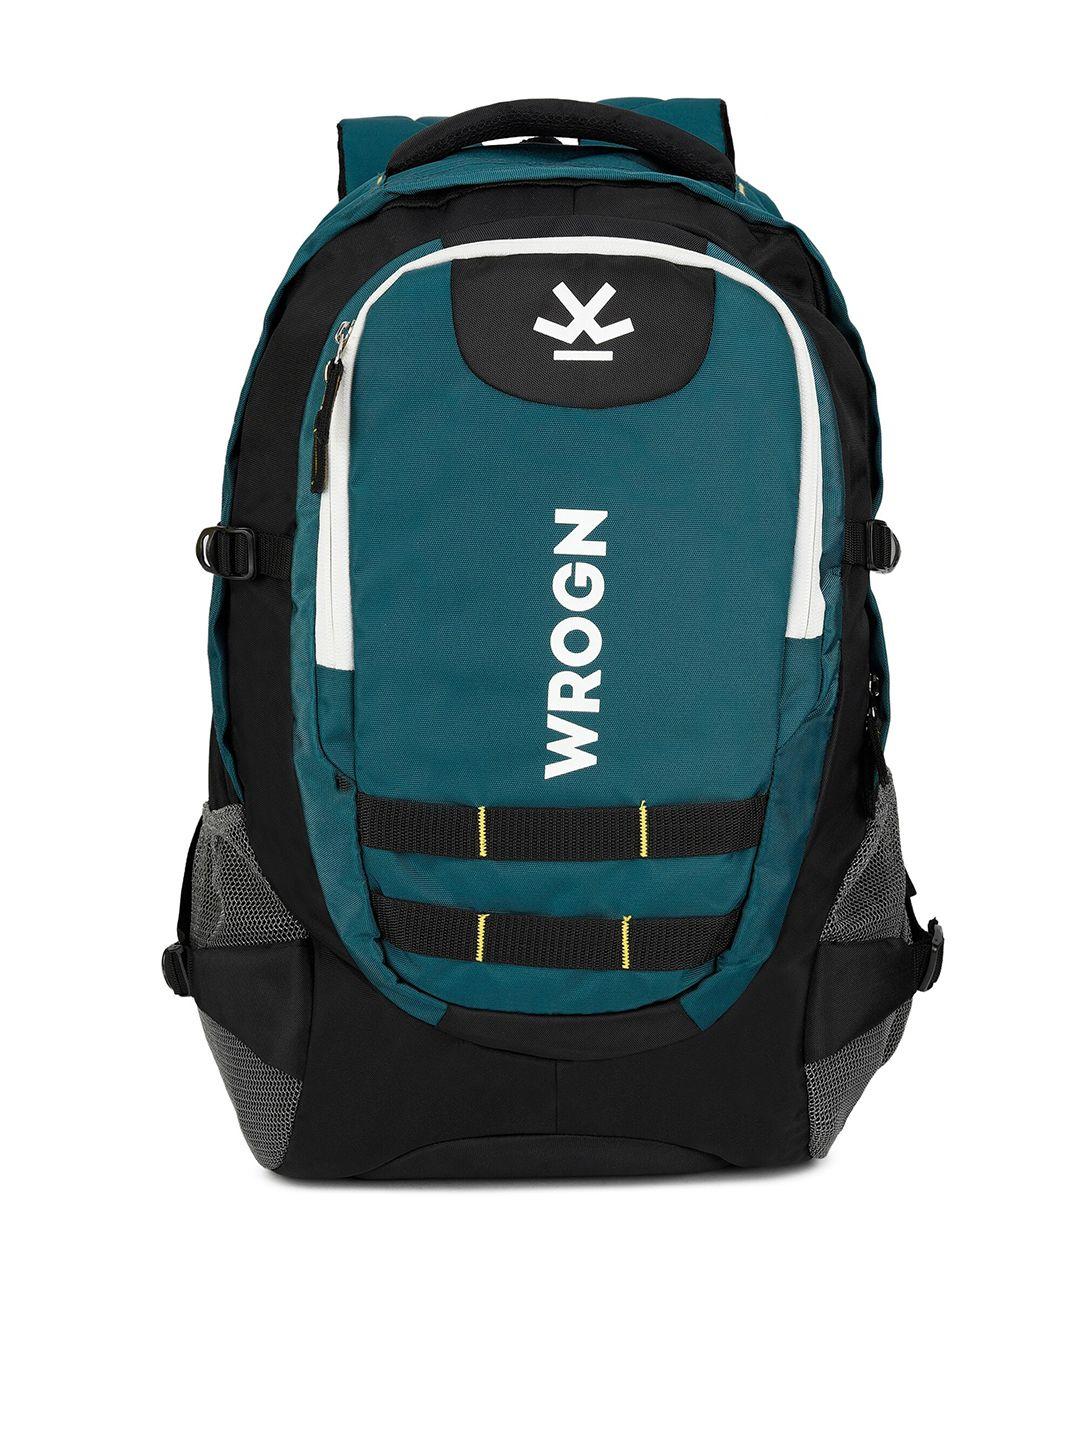 wrogn typography backpack with reflective strip